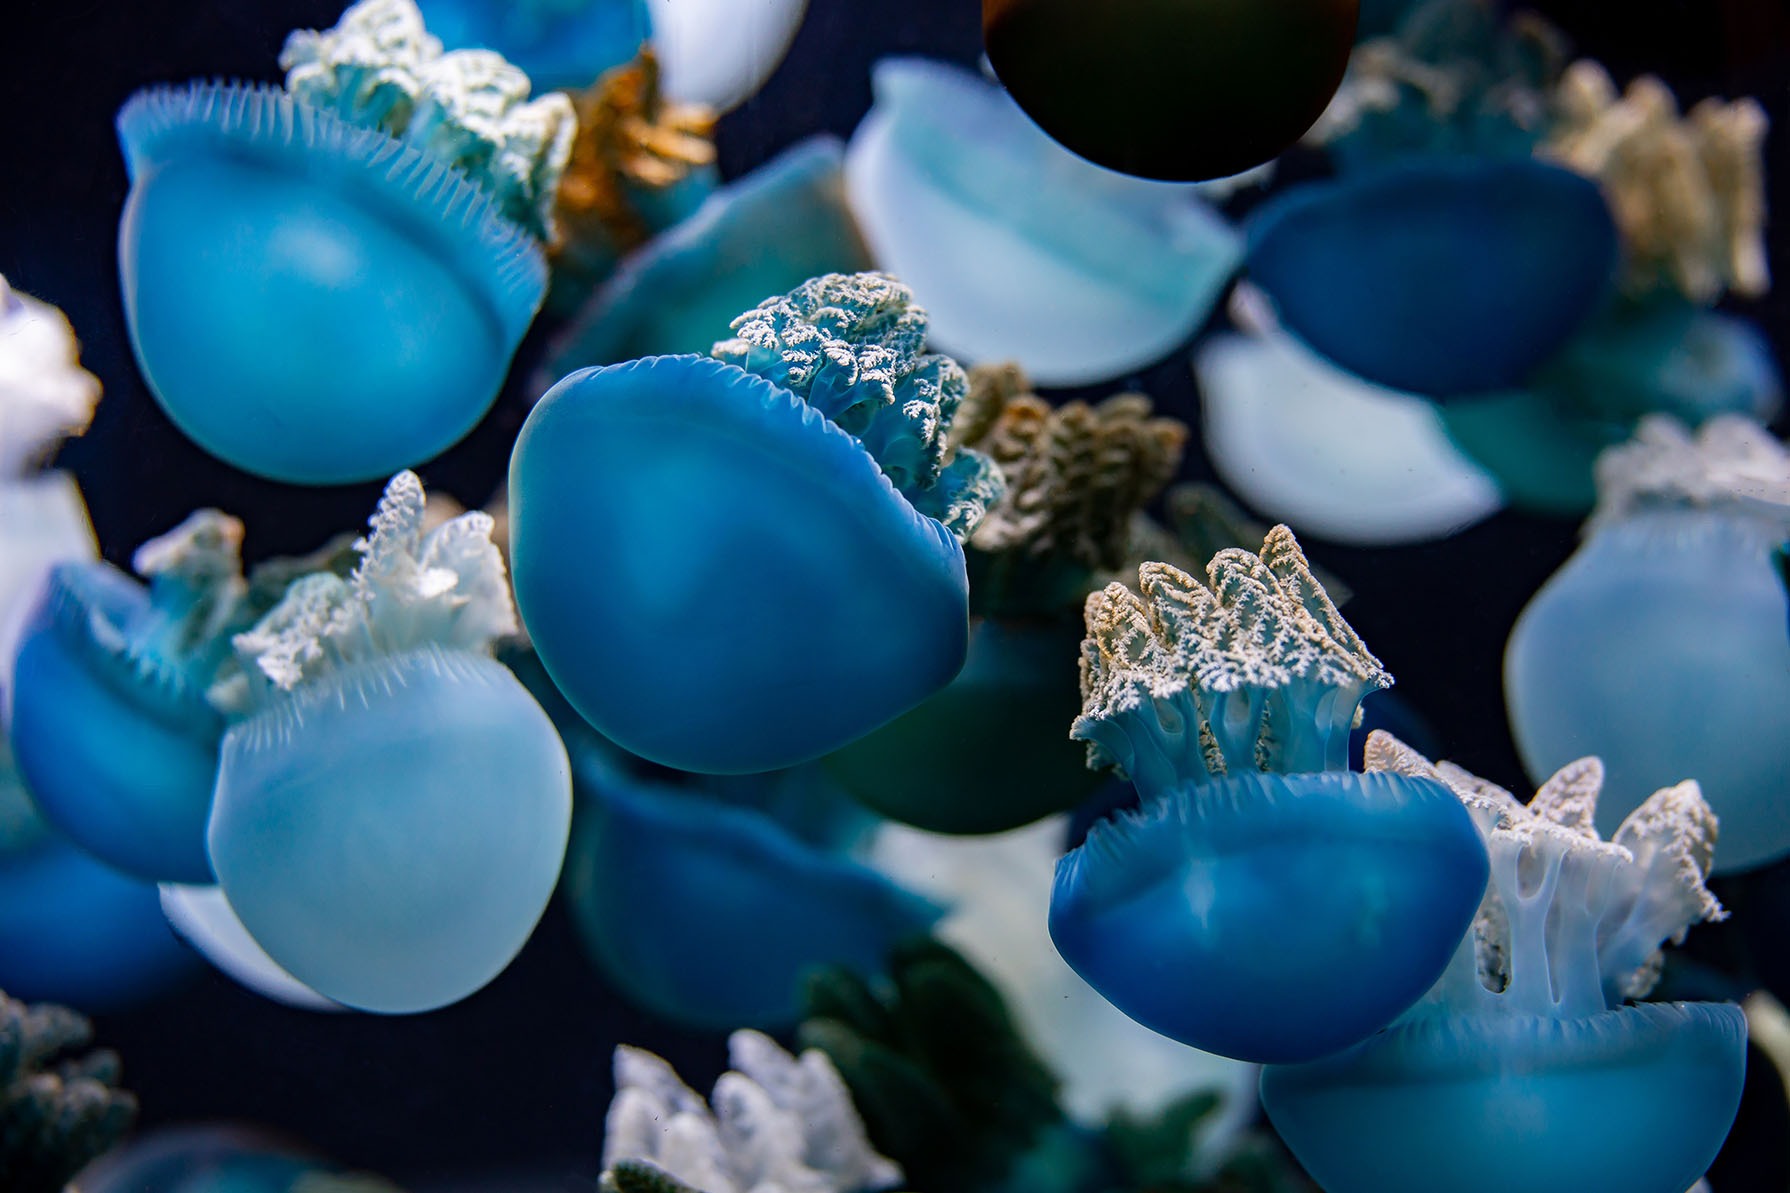 Group of blue blubber jellies